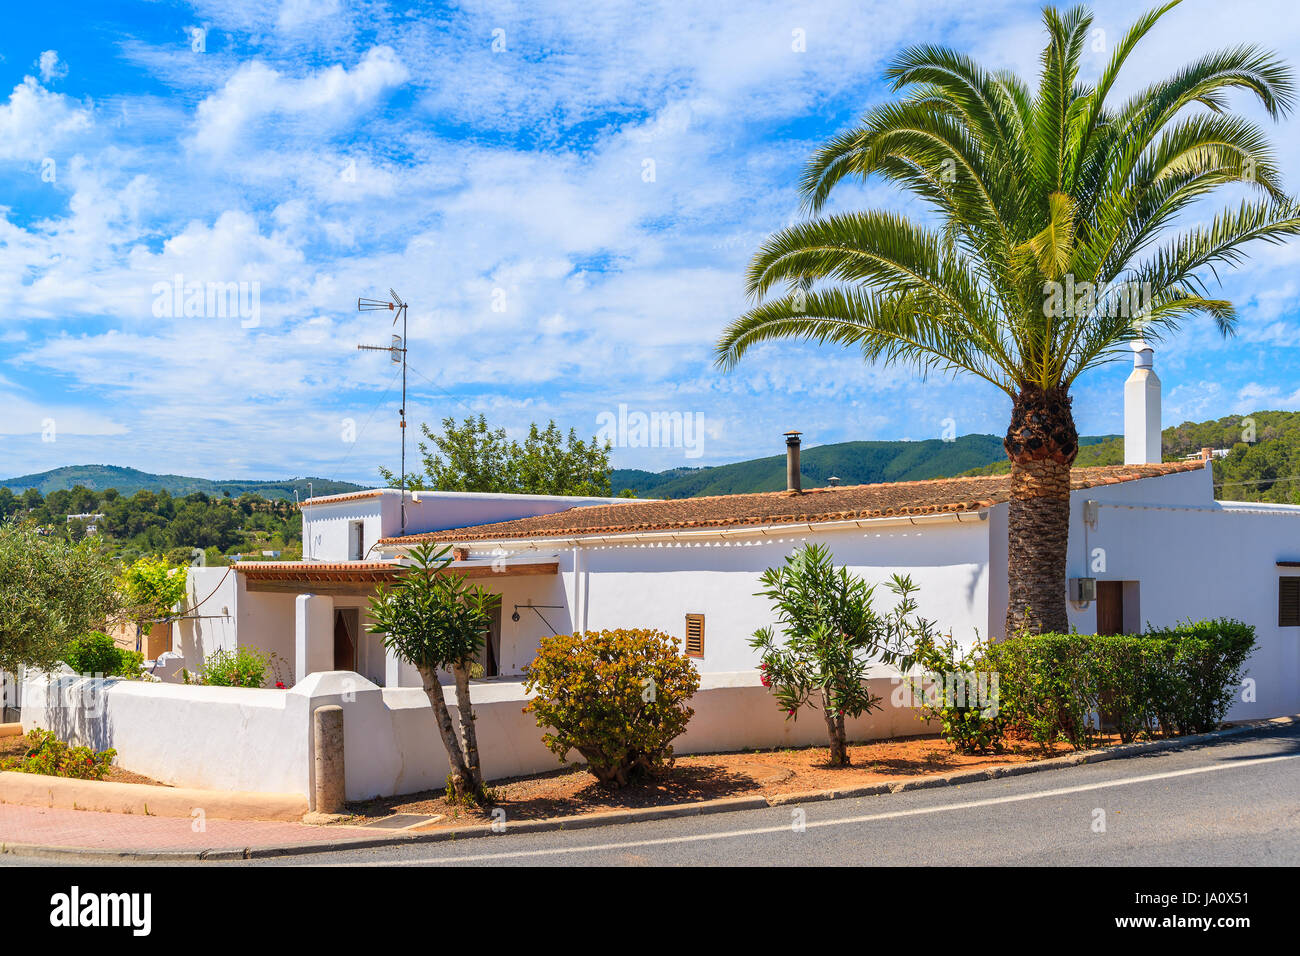 Typical white house with palm tree on side of a road in Sant Carles de Peralta village, Ibiza island, Spain Stock Photo